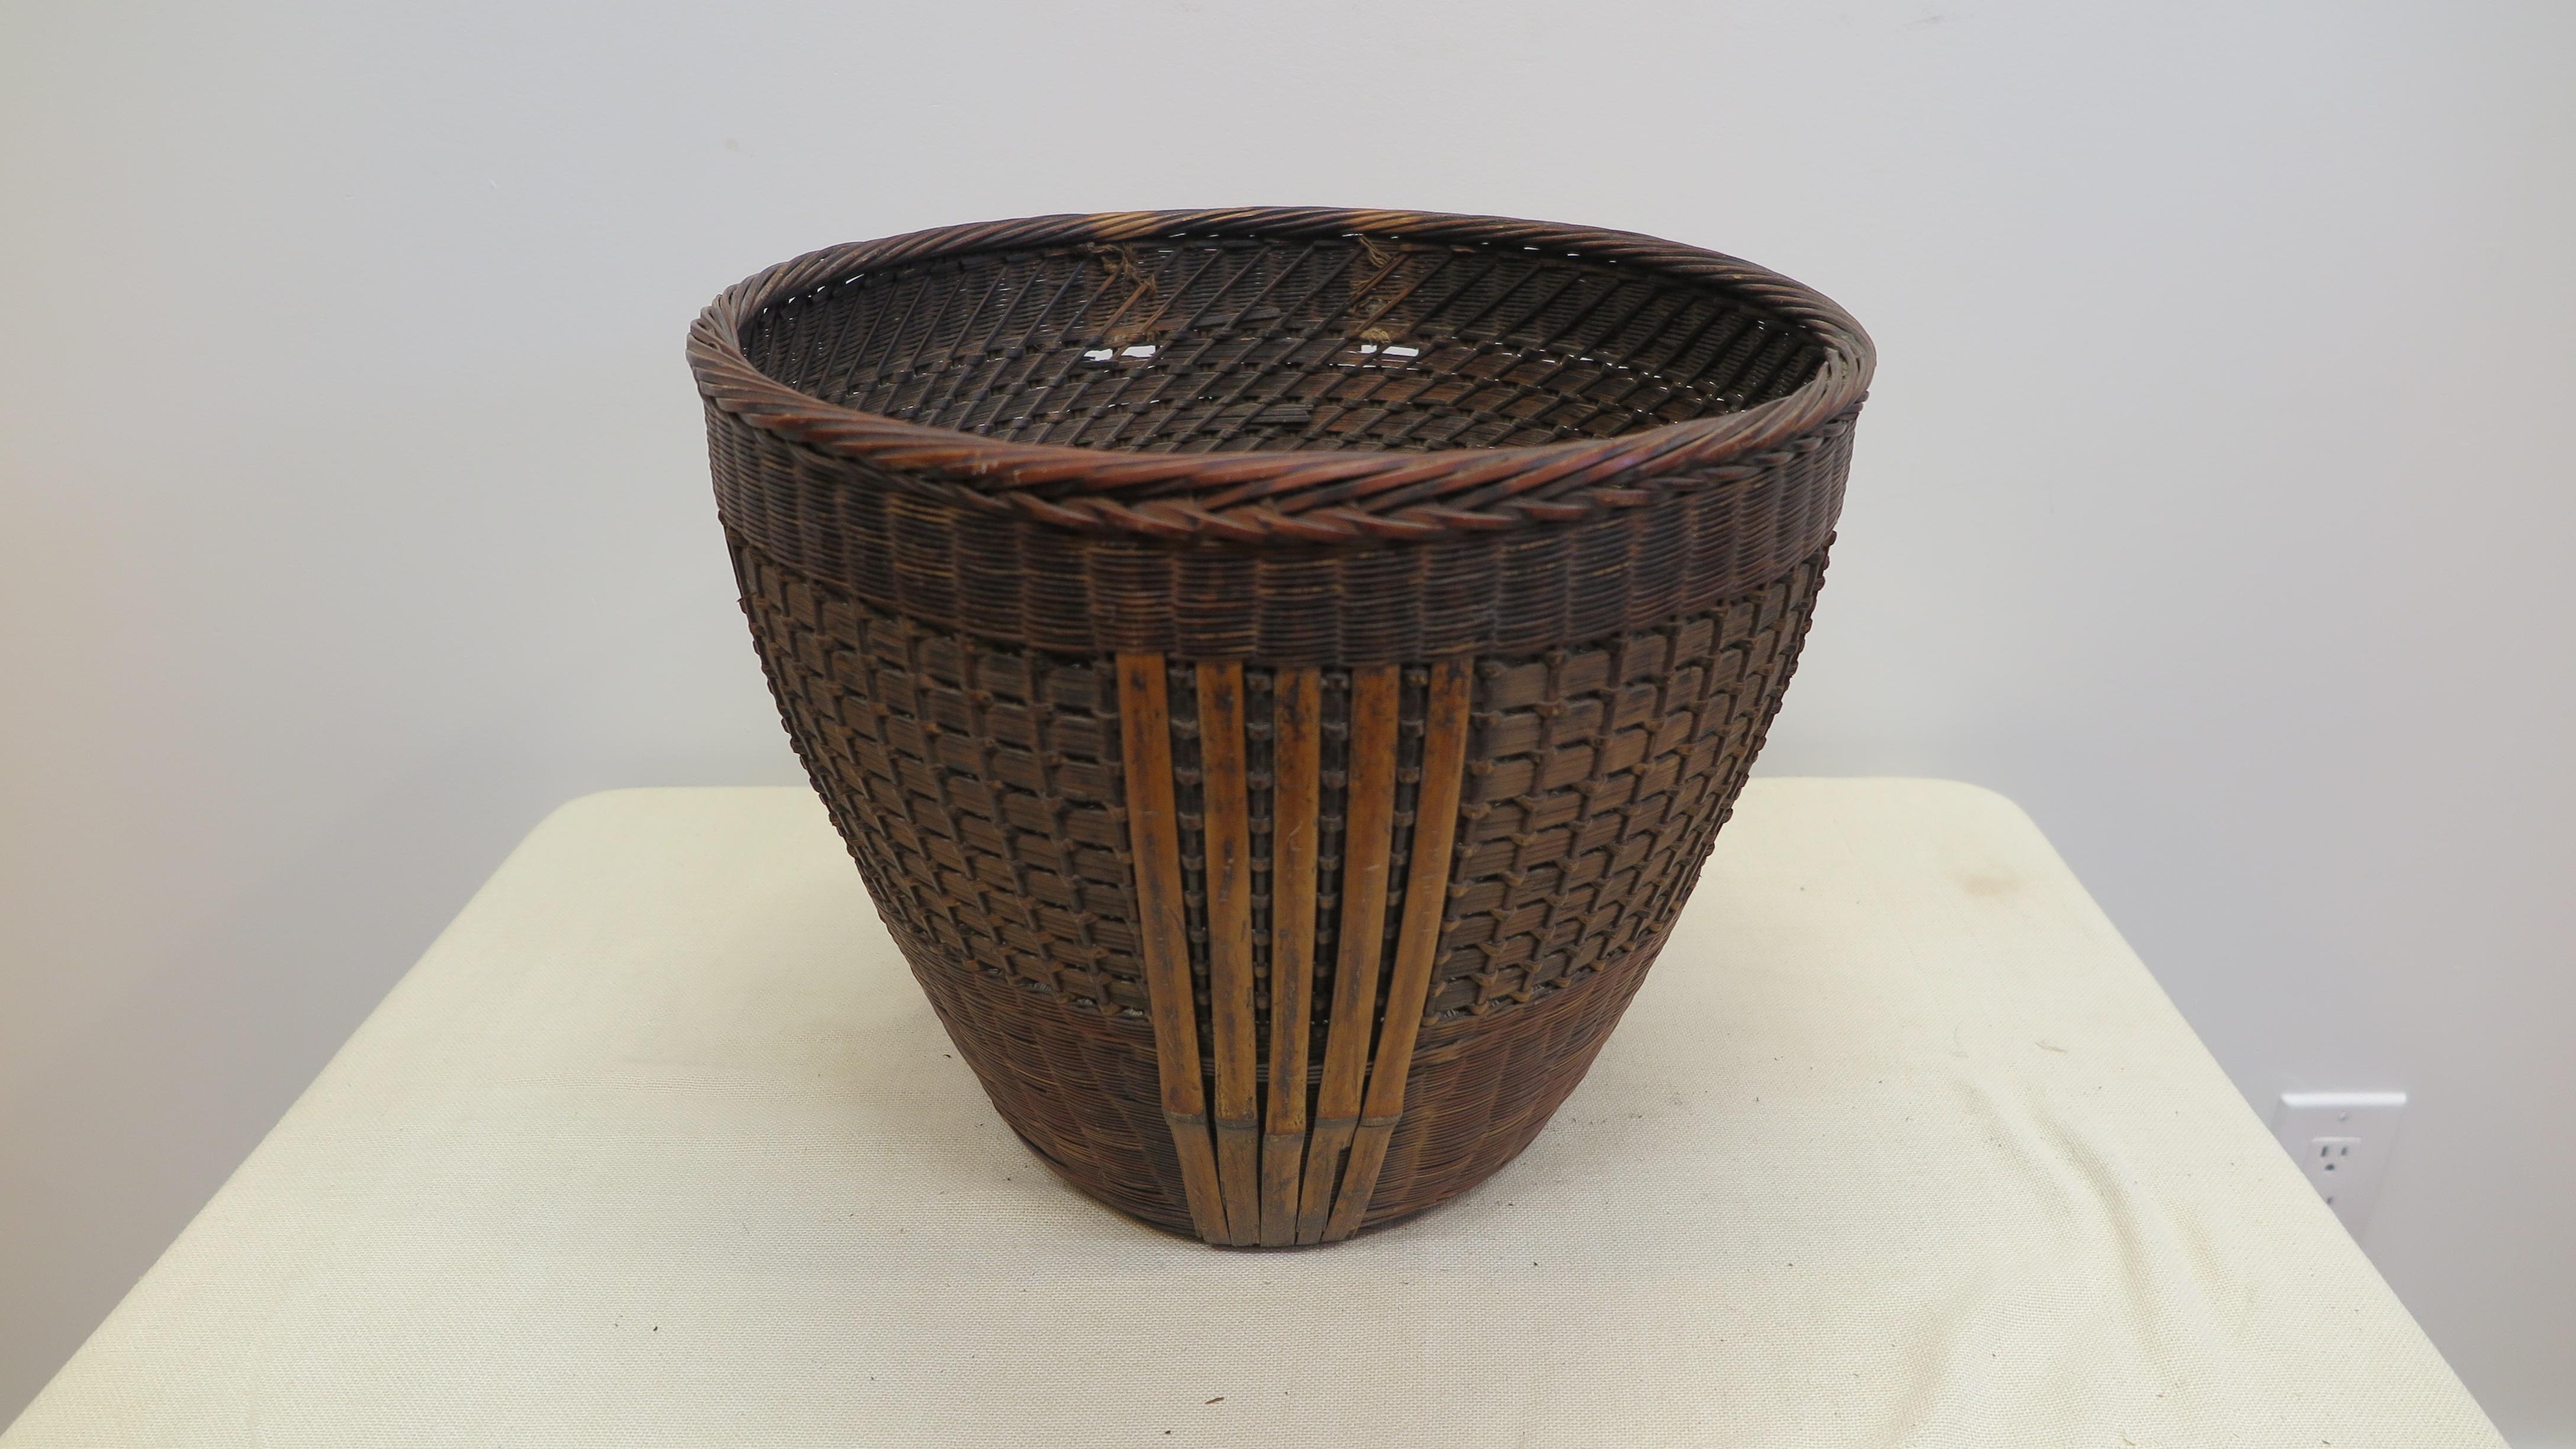 Antique Collection Basket. Antique Chinese Woven Basket. Beautifully hand-woven large rattan and bamboo collection basket. Used to gather and hold fruits, apples, pears, pomegranates and gourds. This example exhibits a masters ablilty to weave reed